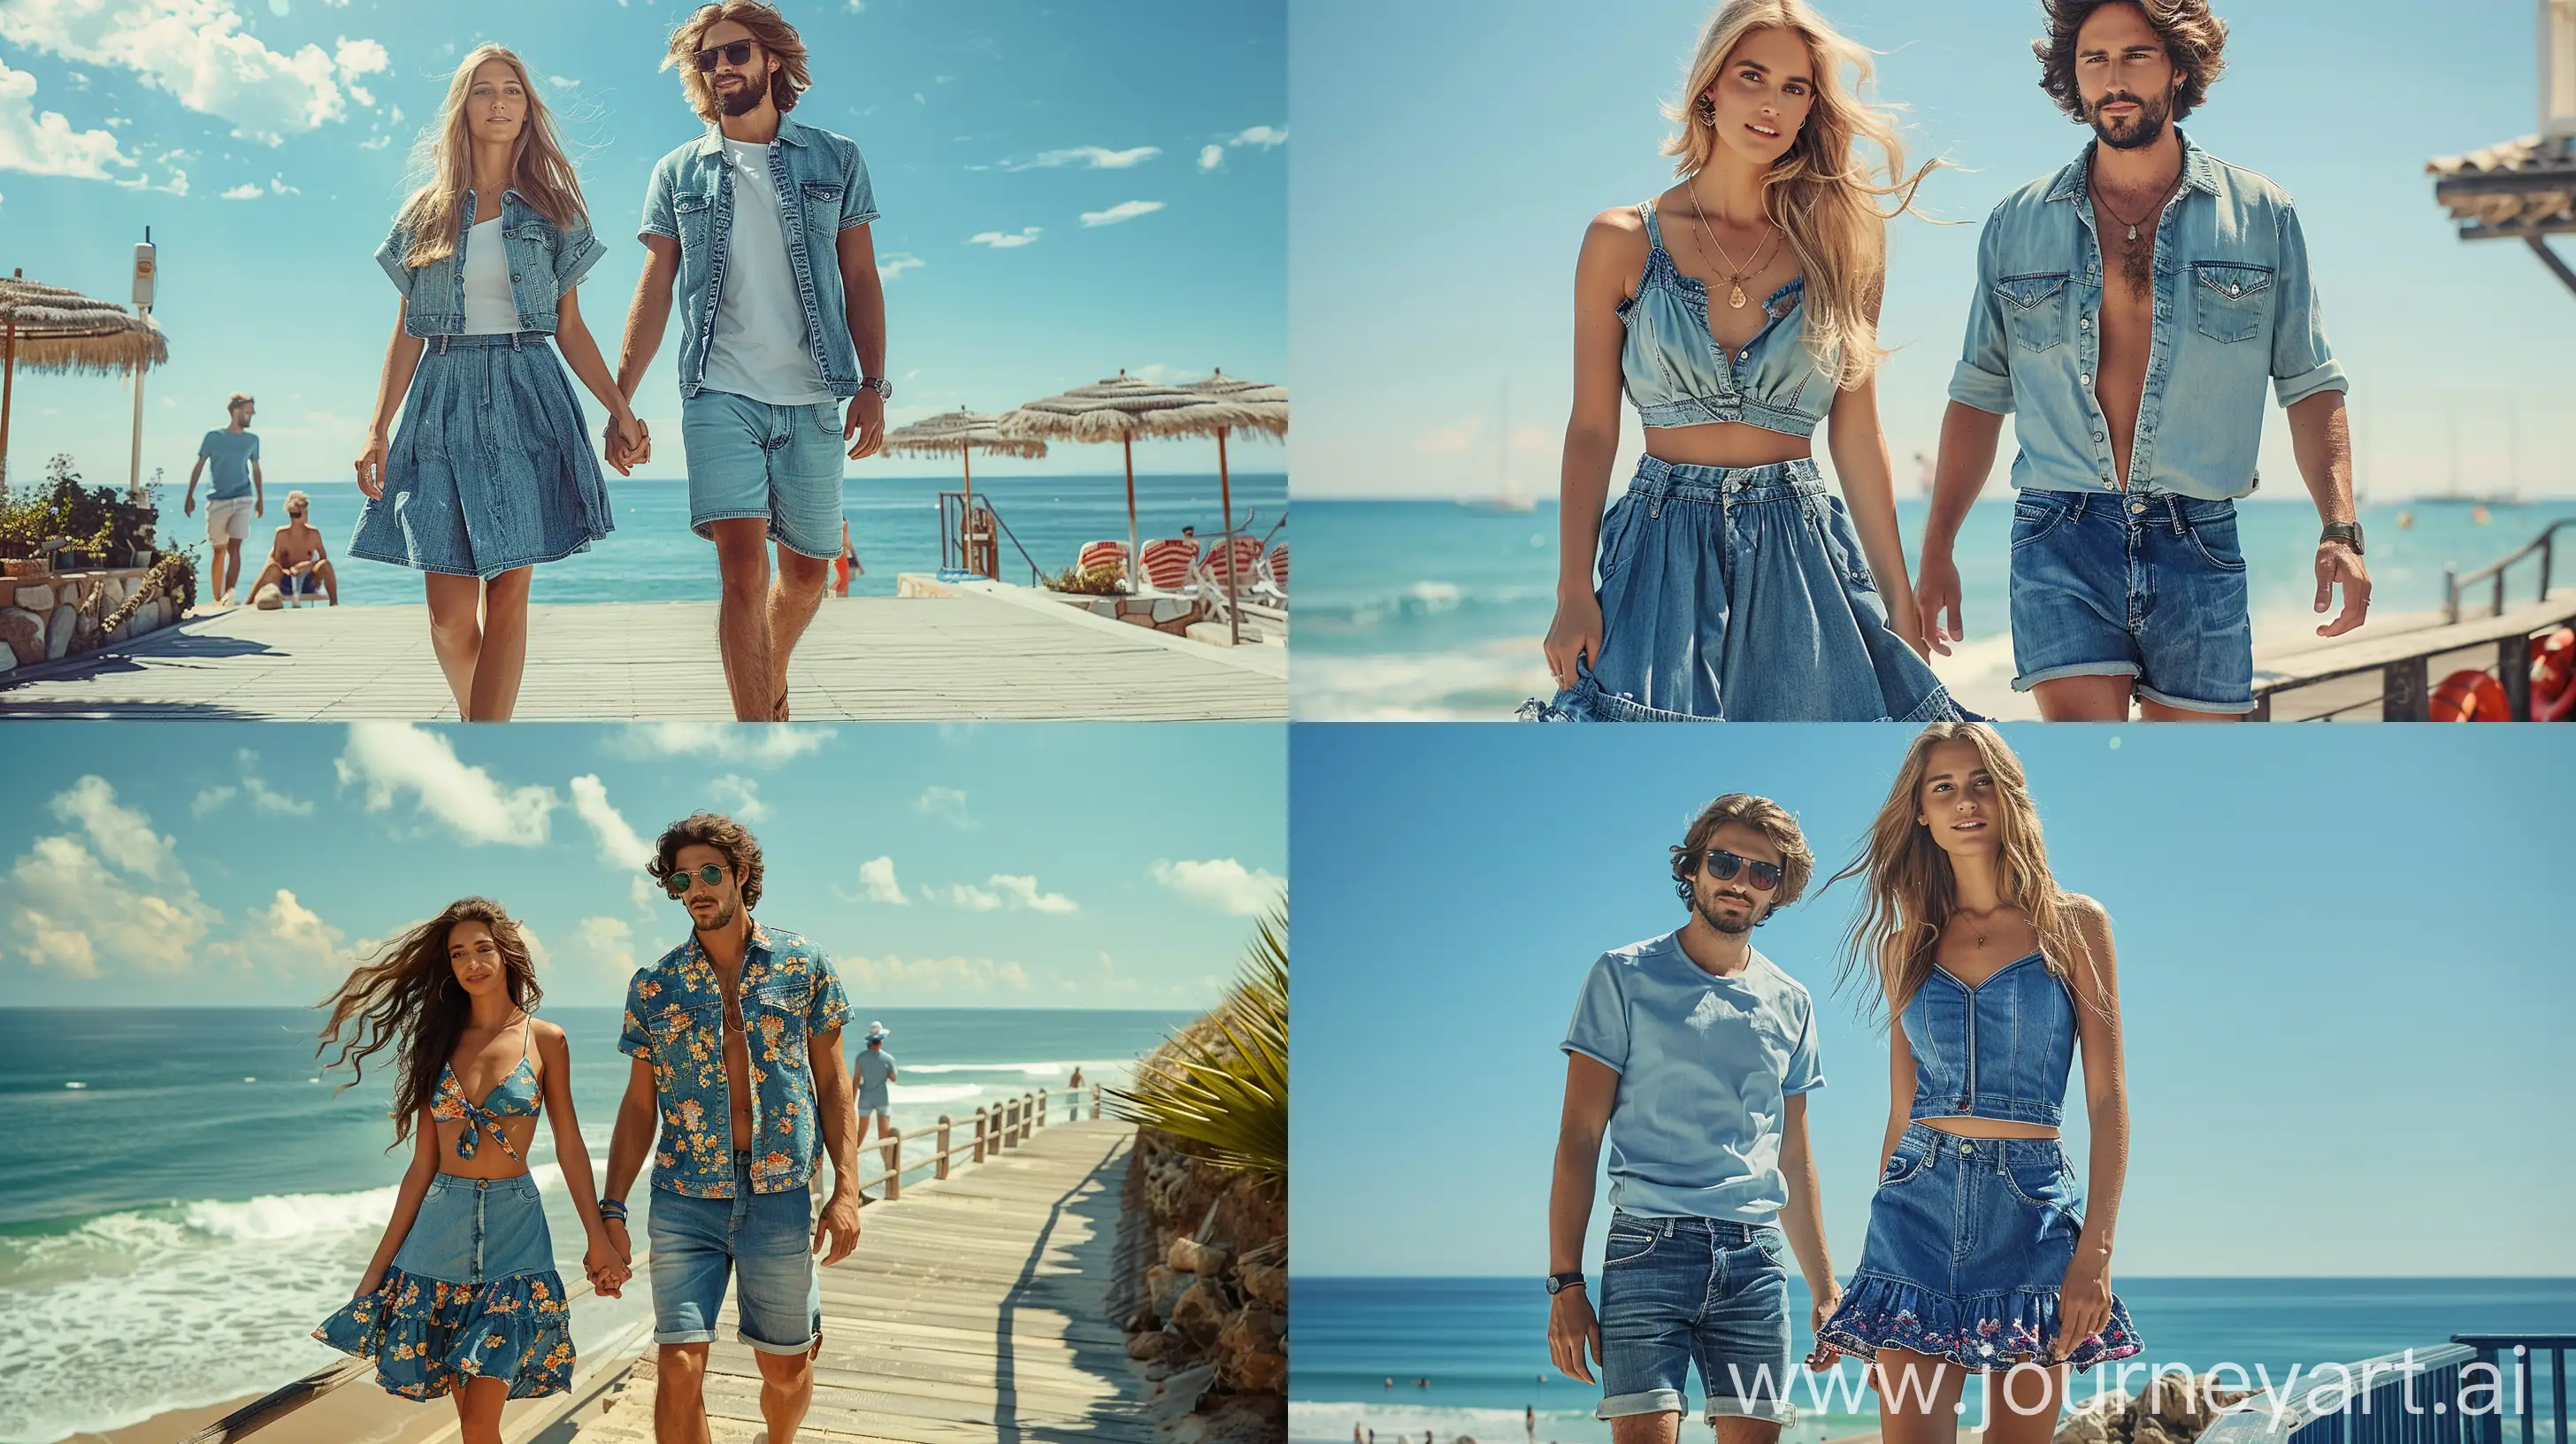 Casual Seaside Ensemble: An image of a woman and a man strolling on a beach boardwalk, the woman in a denim skirt and the man in denim shorts, both showcasing relaxed summer fashion with a sea backdrop. —ar 16:9 —style raw —stylize 300